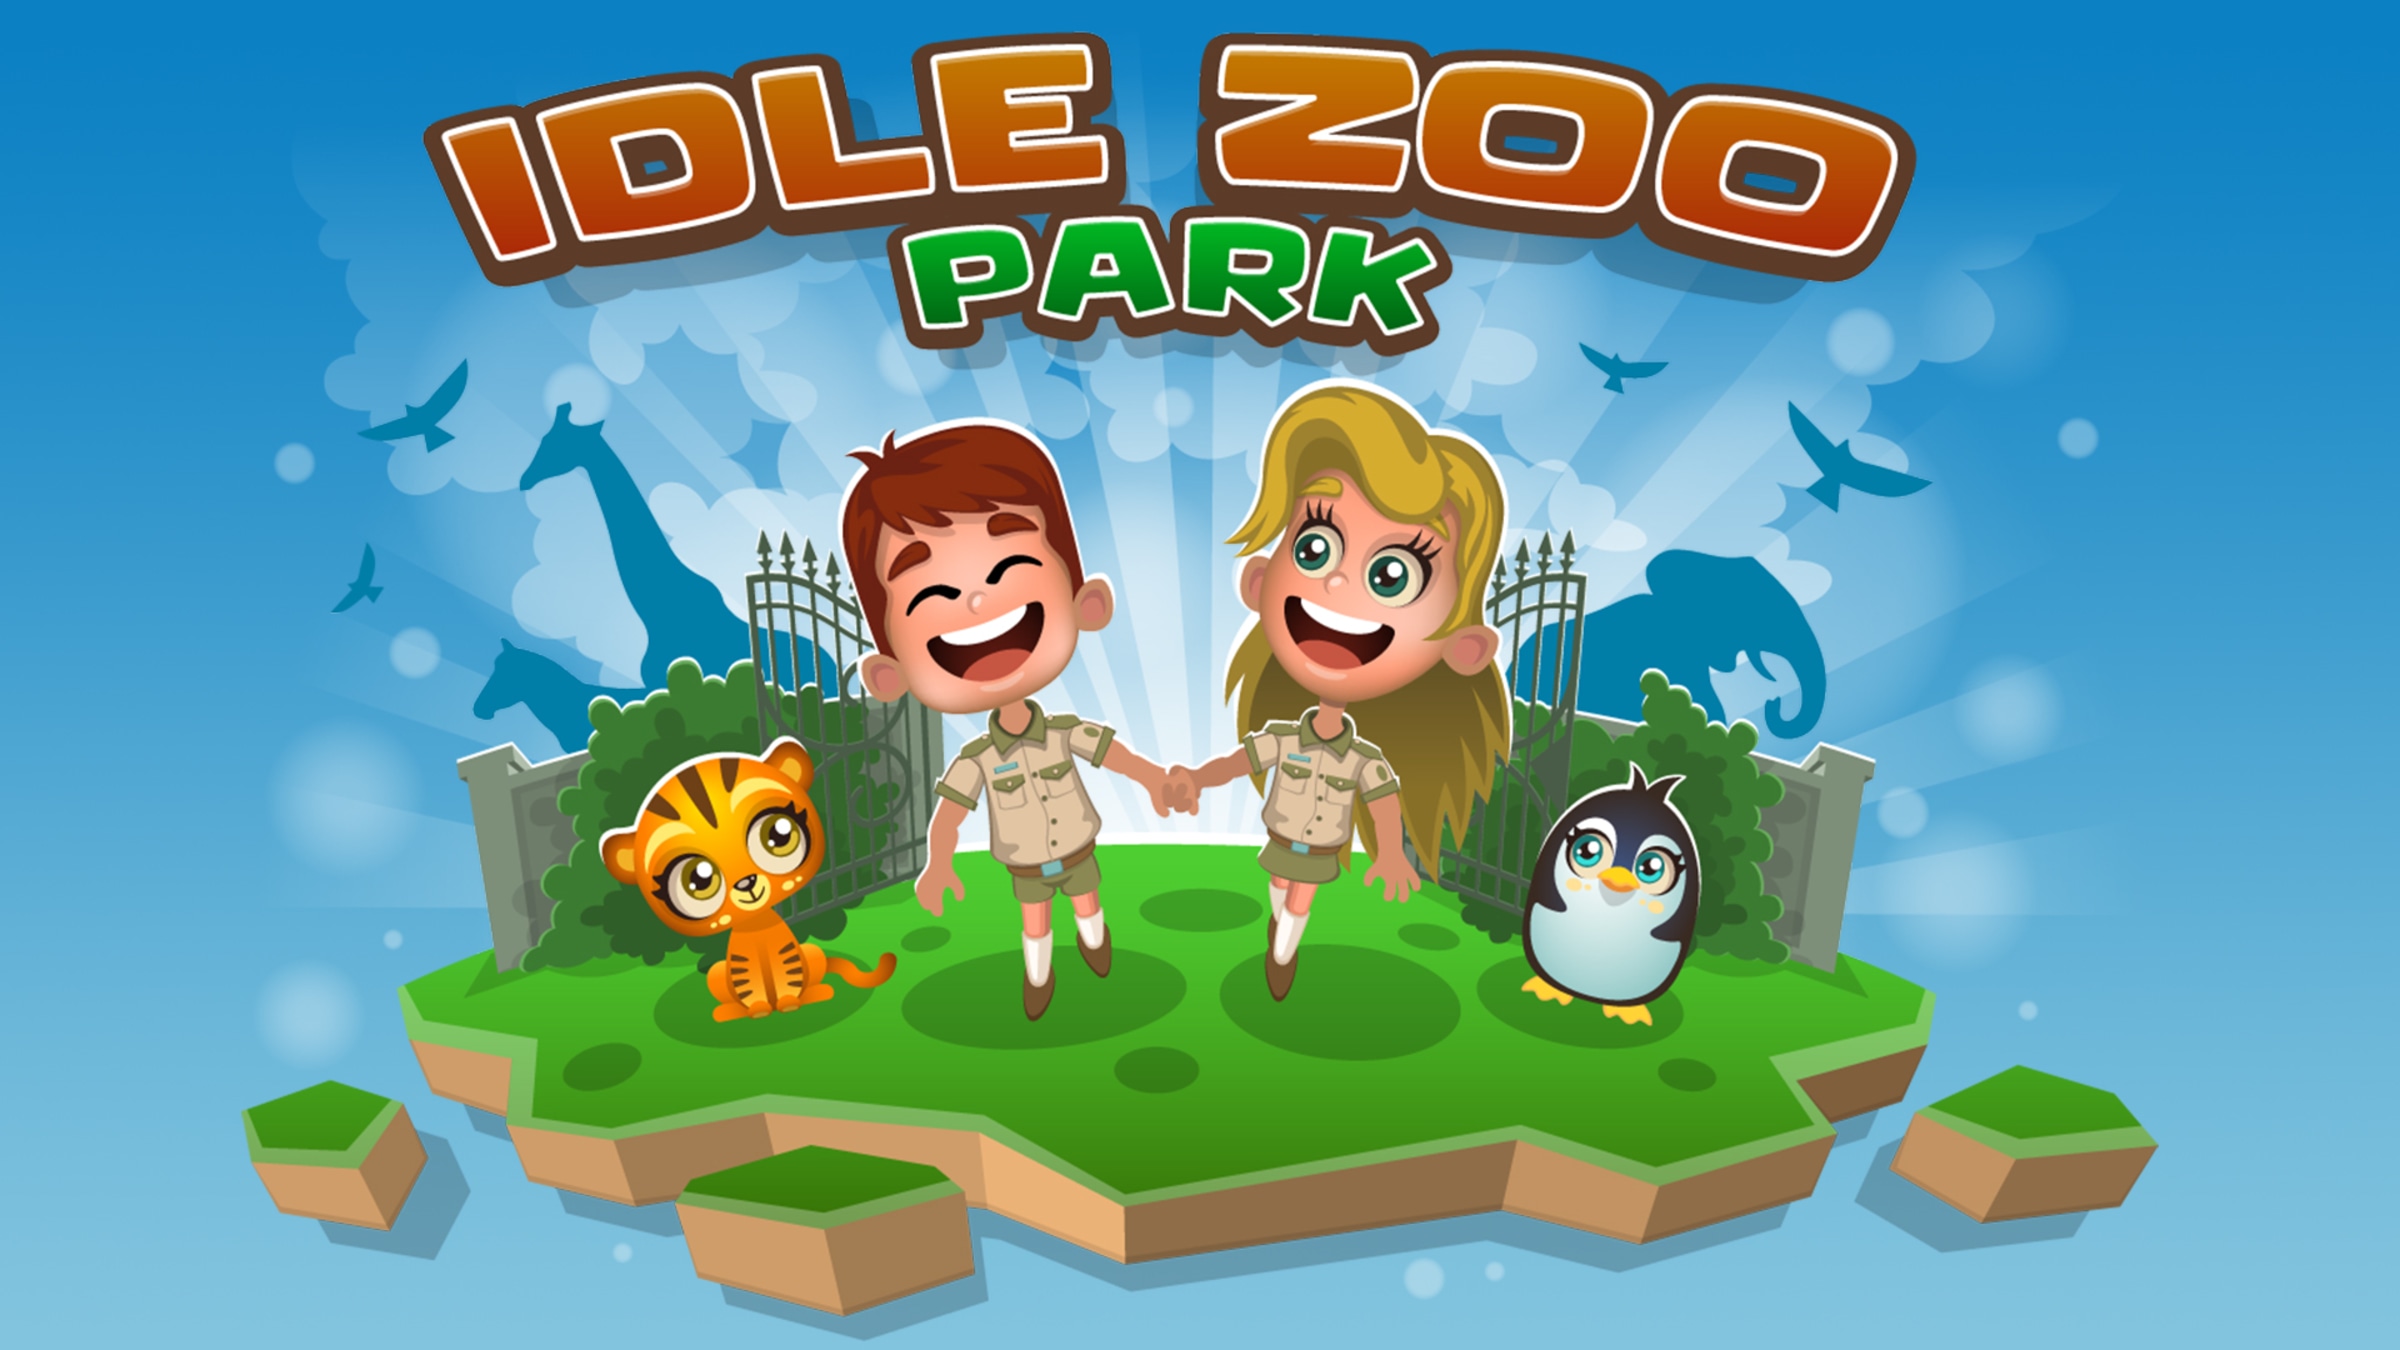 Let's Build a Zoo for Nintendo Switch - Nintendo Official Site